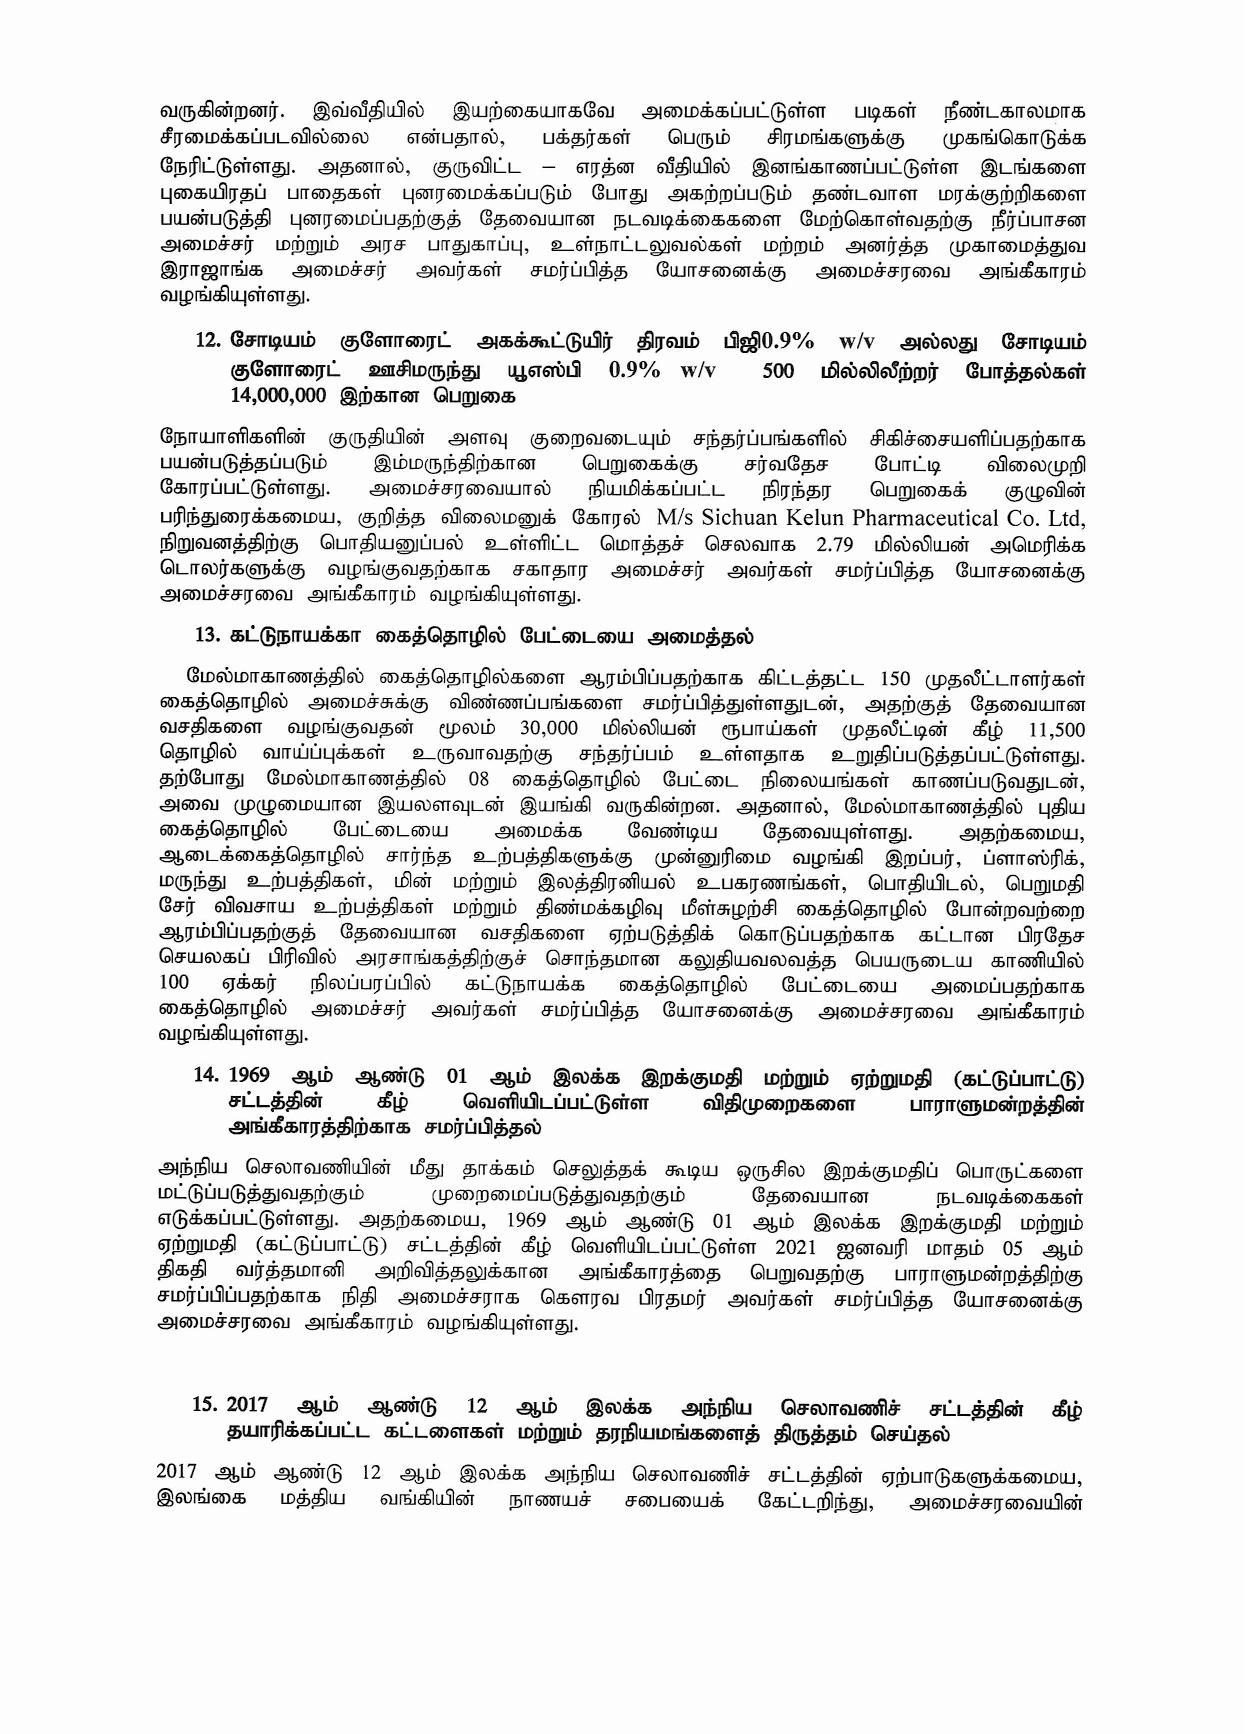 Cabinet Decision on 25.01.2021 Tamil page 005